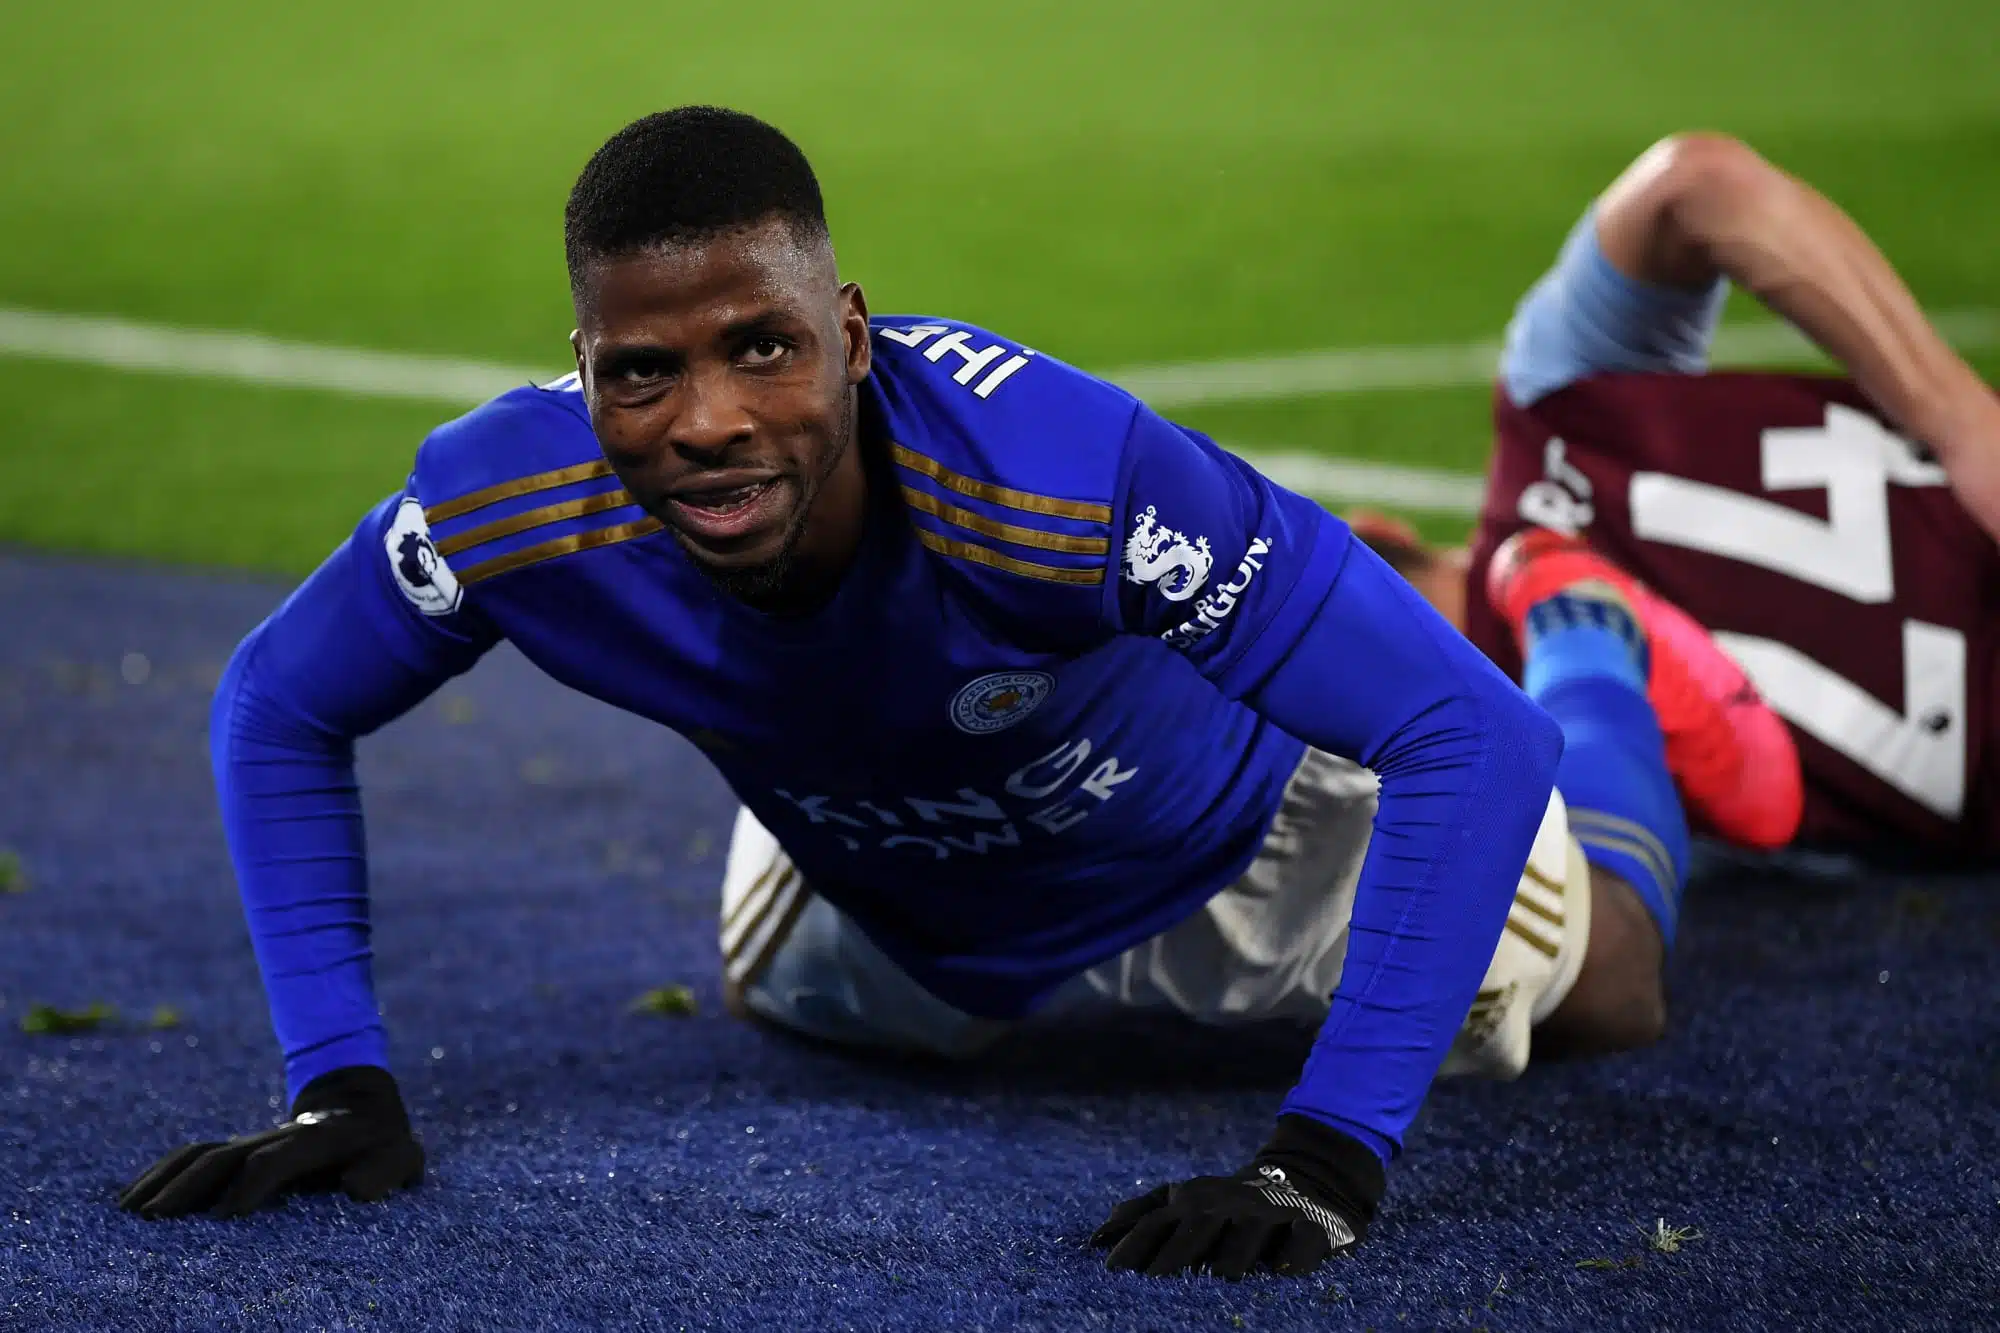 AFCON 2023: Kelechi Iheanacho remains out – Leicester coach reveals